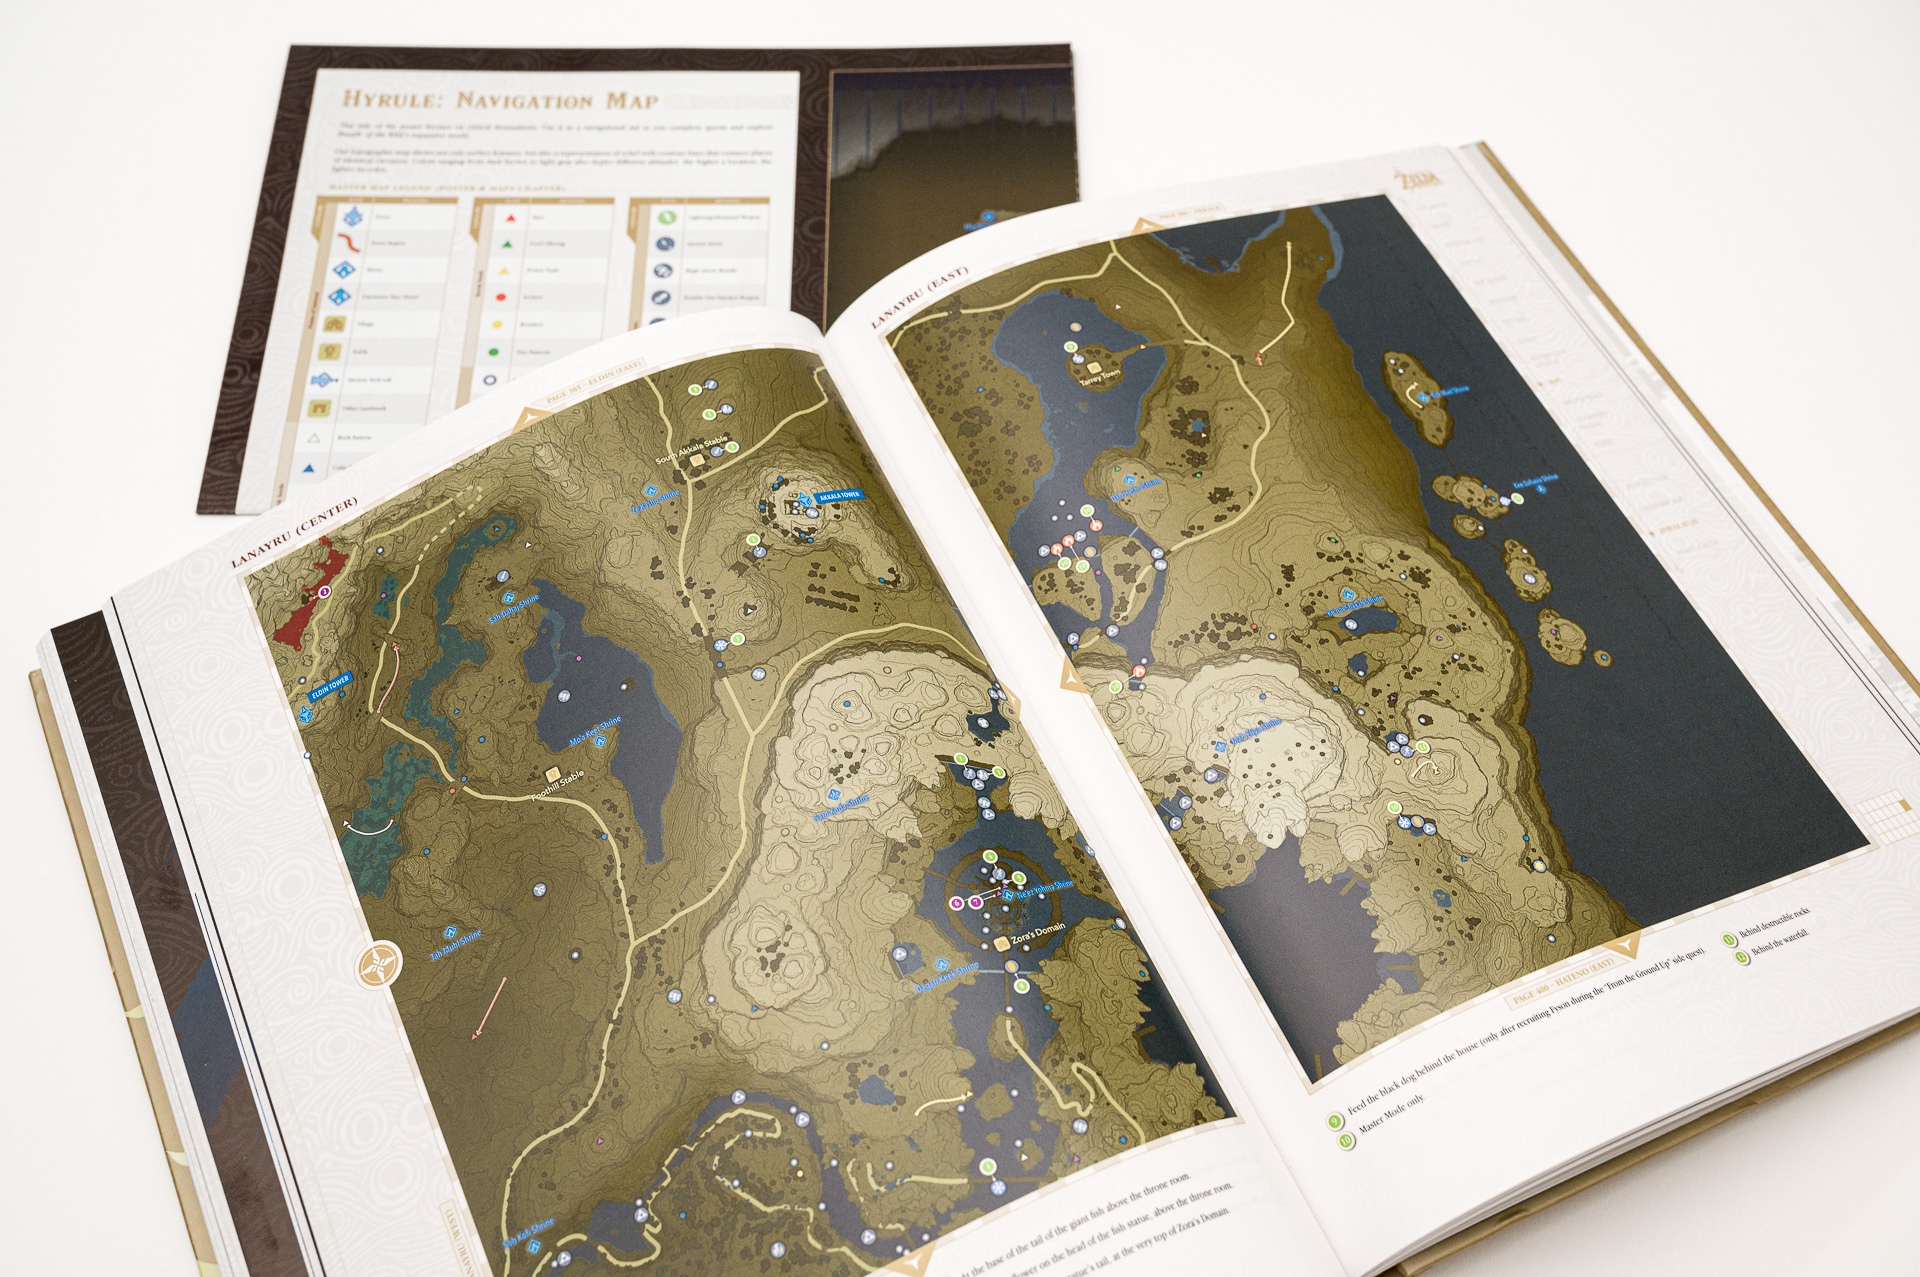 The Legend of Zelda: Breath of the Wild Strategy Guide Book: Full